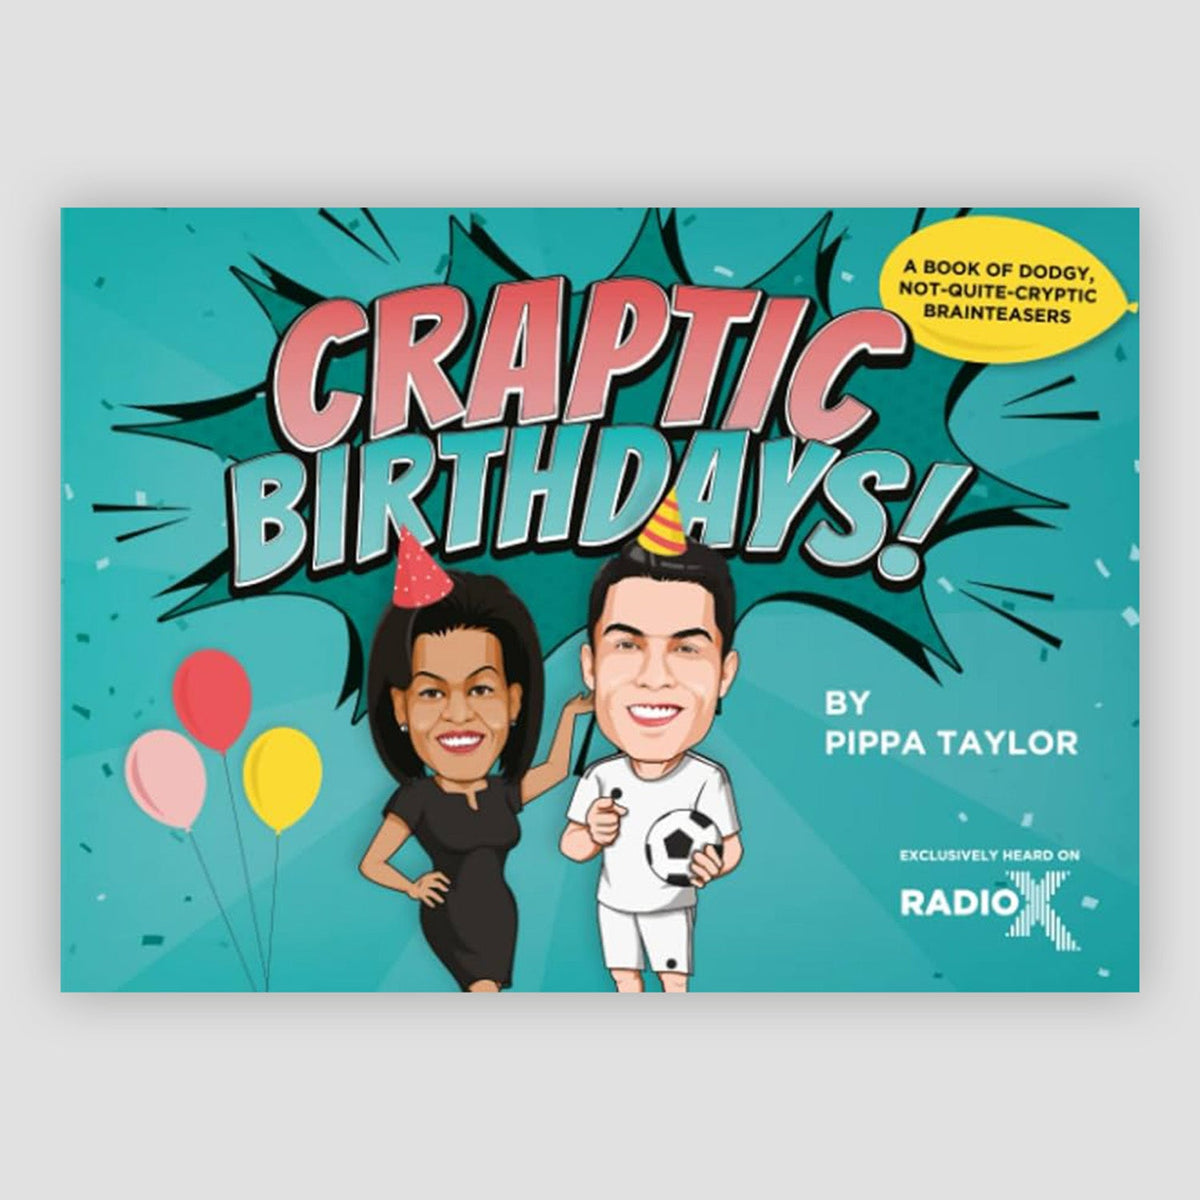 Craptic Birthdays: A book of dodgy, not-quite-cryptic brainteasers Book